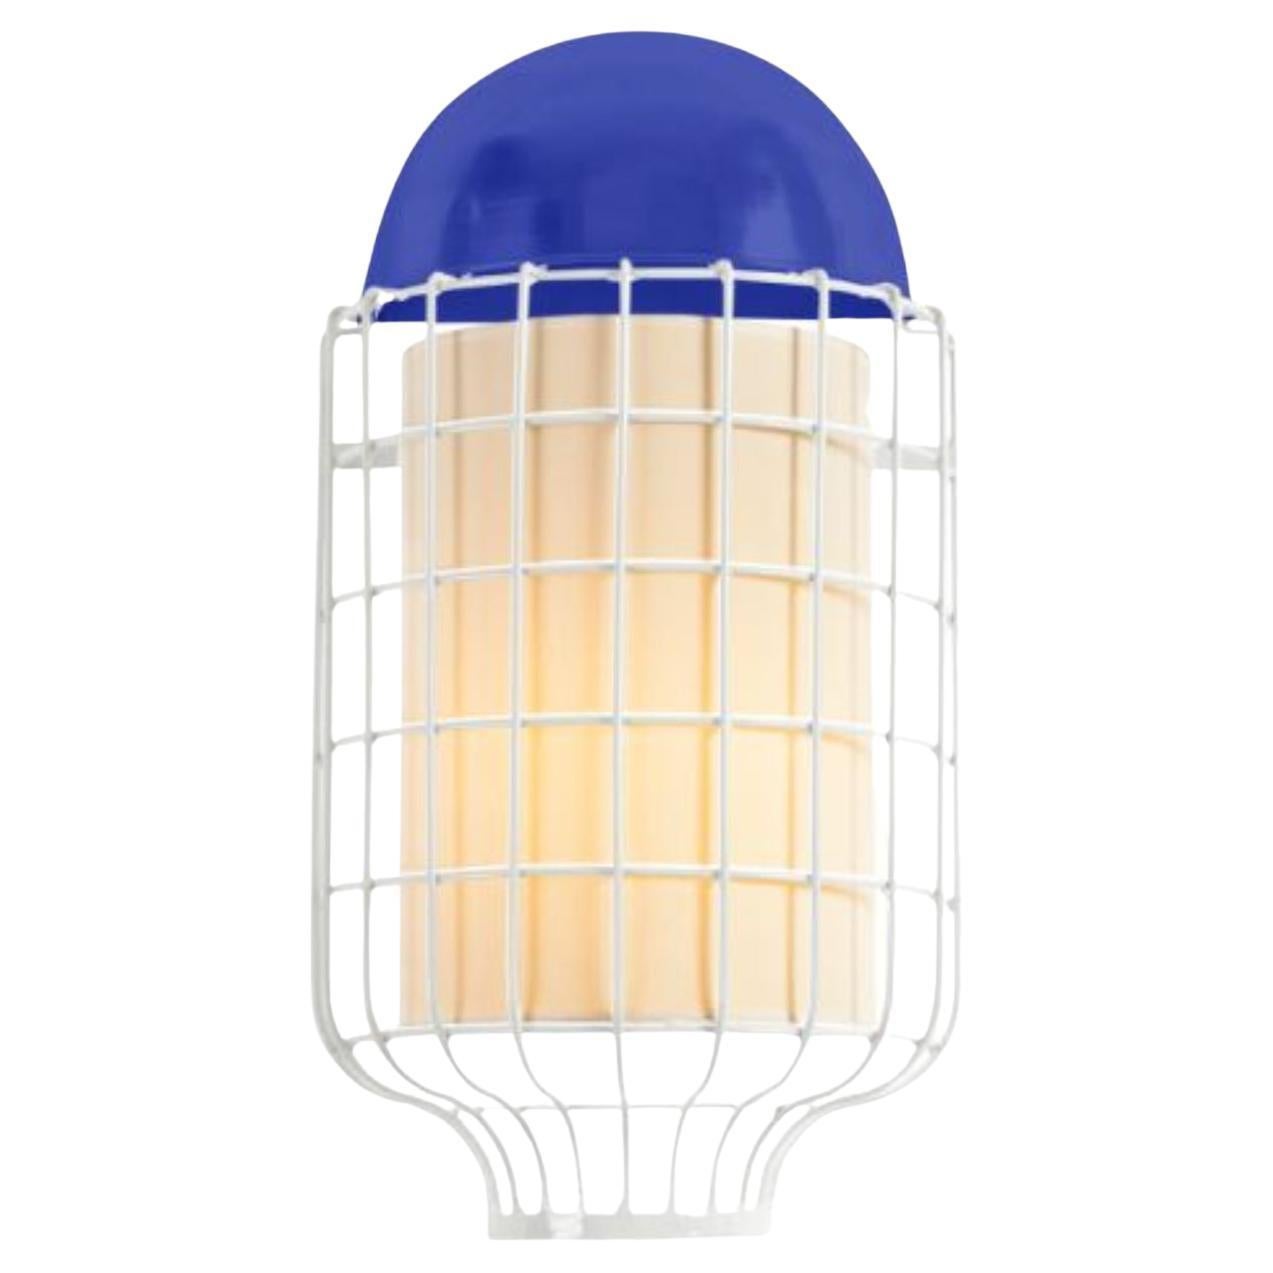 Cobalt Magnolia Wall Lamp by Dooq For Sale